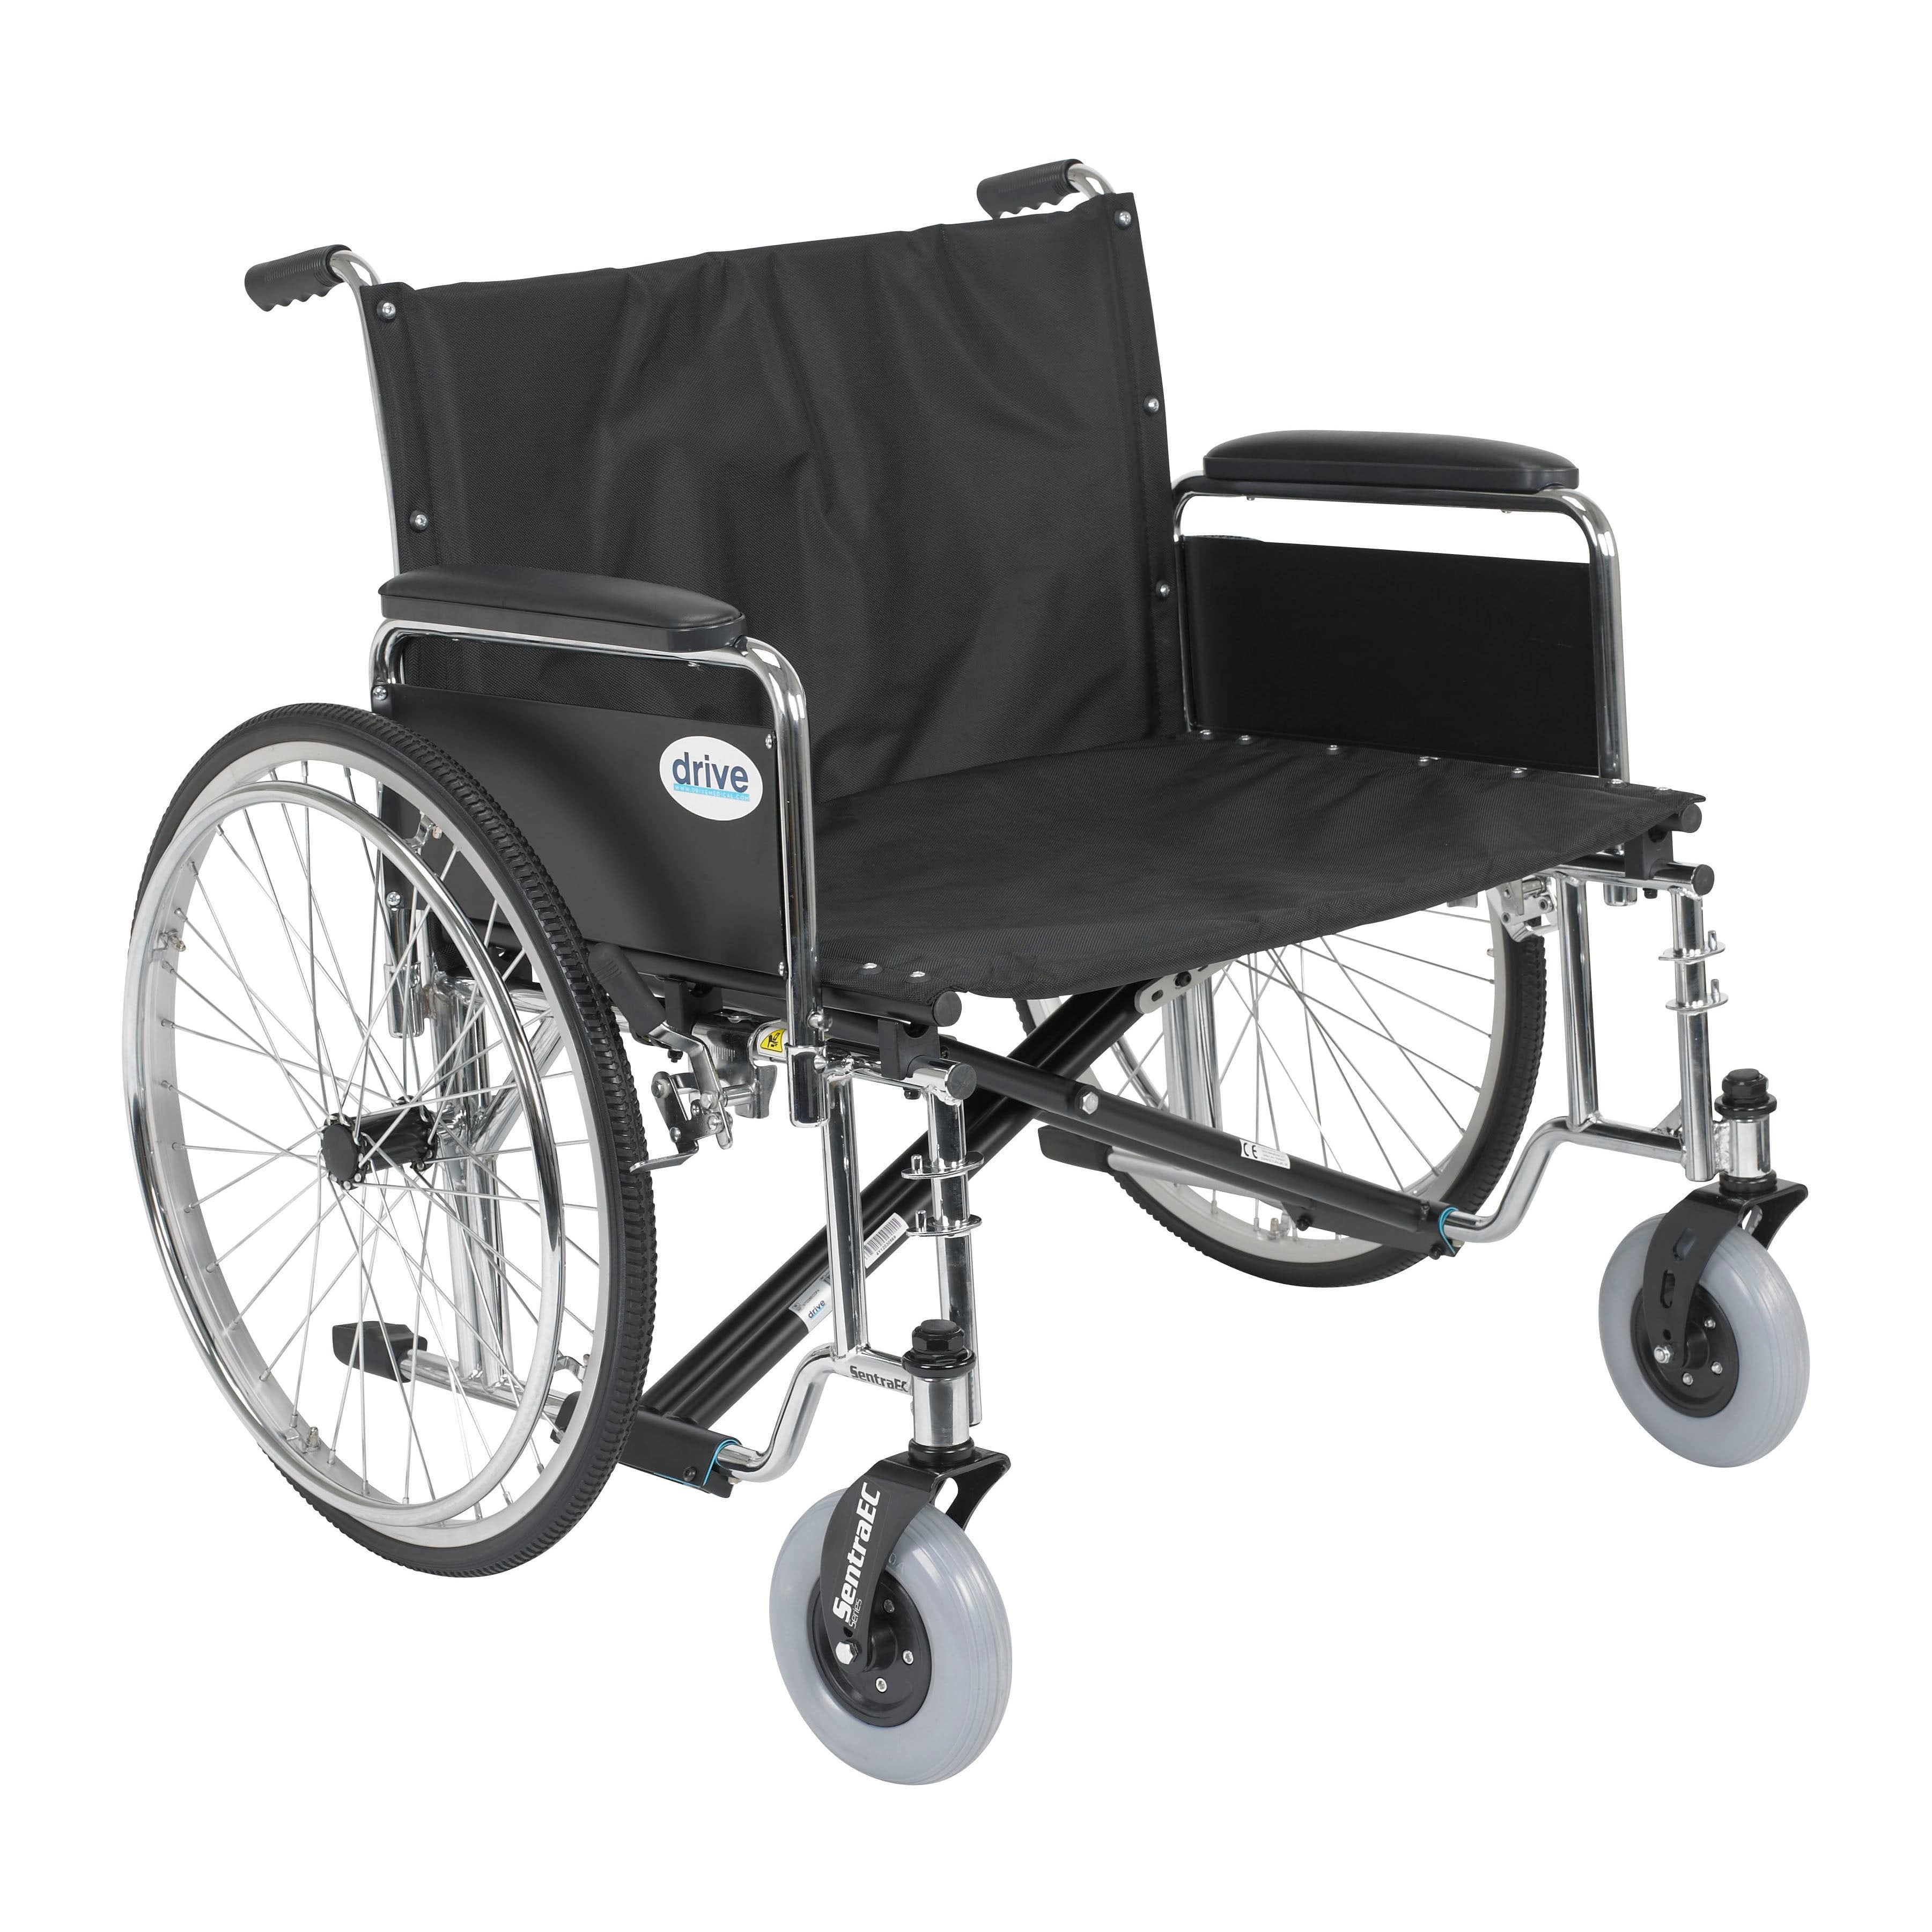 Drive Medical Wheelchairs Detachable Full Arms / 30" Seat Drive Medical Sentra EC Heavy Duty Extra Wide Wheelchair